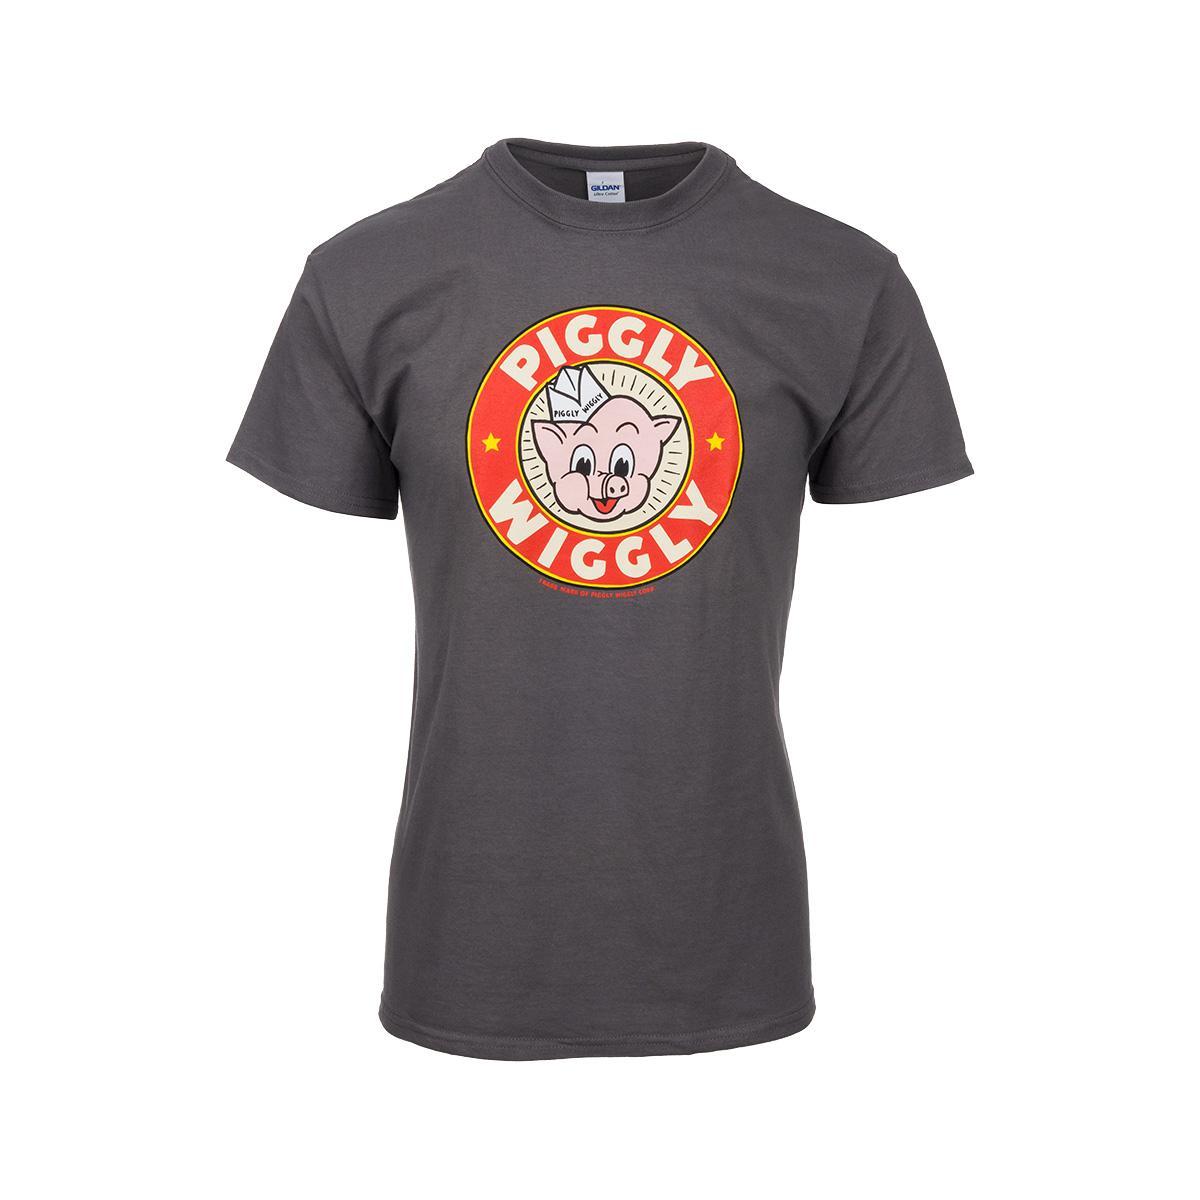 Grocery Store Starts with T Logo - WILDWOOD PRODUCTIONS. Piggly Wiggly Tee